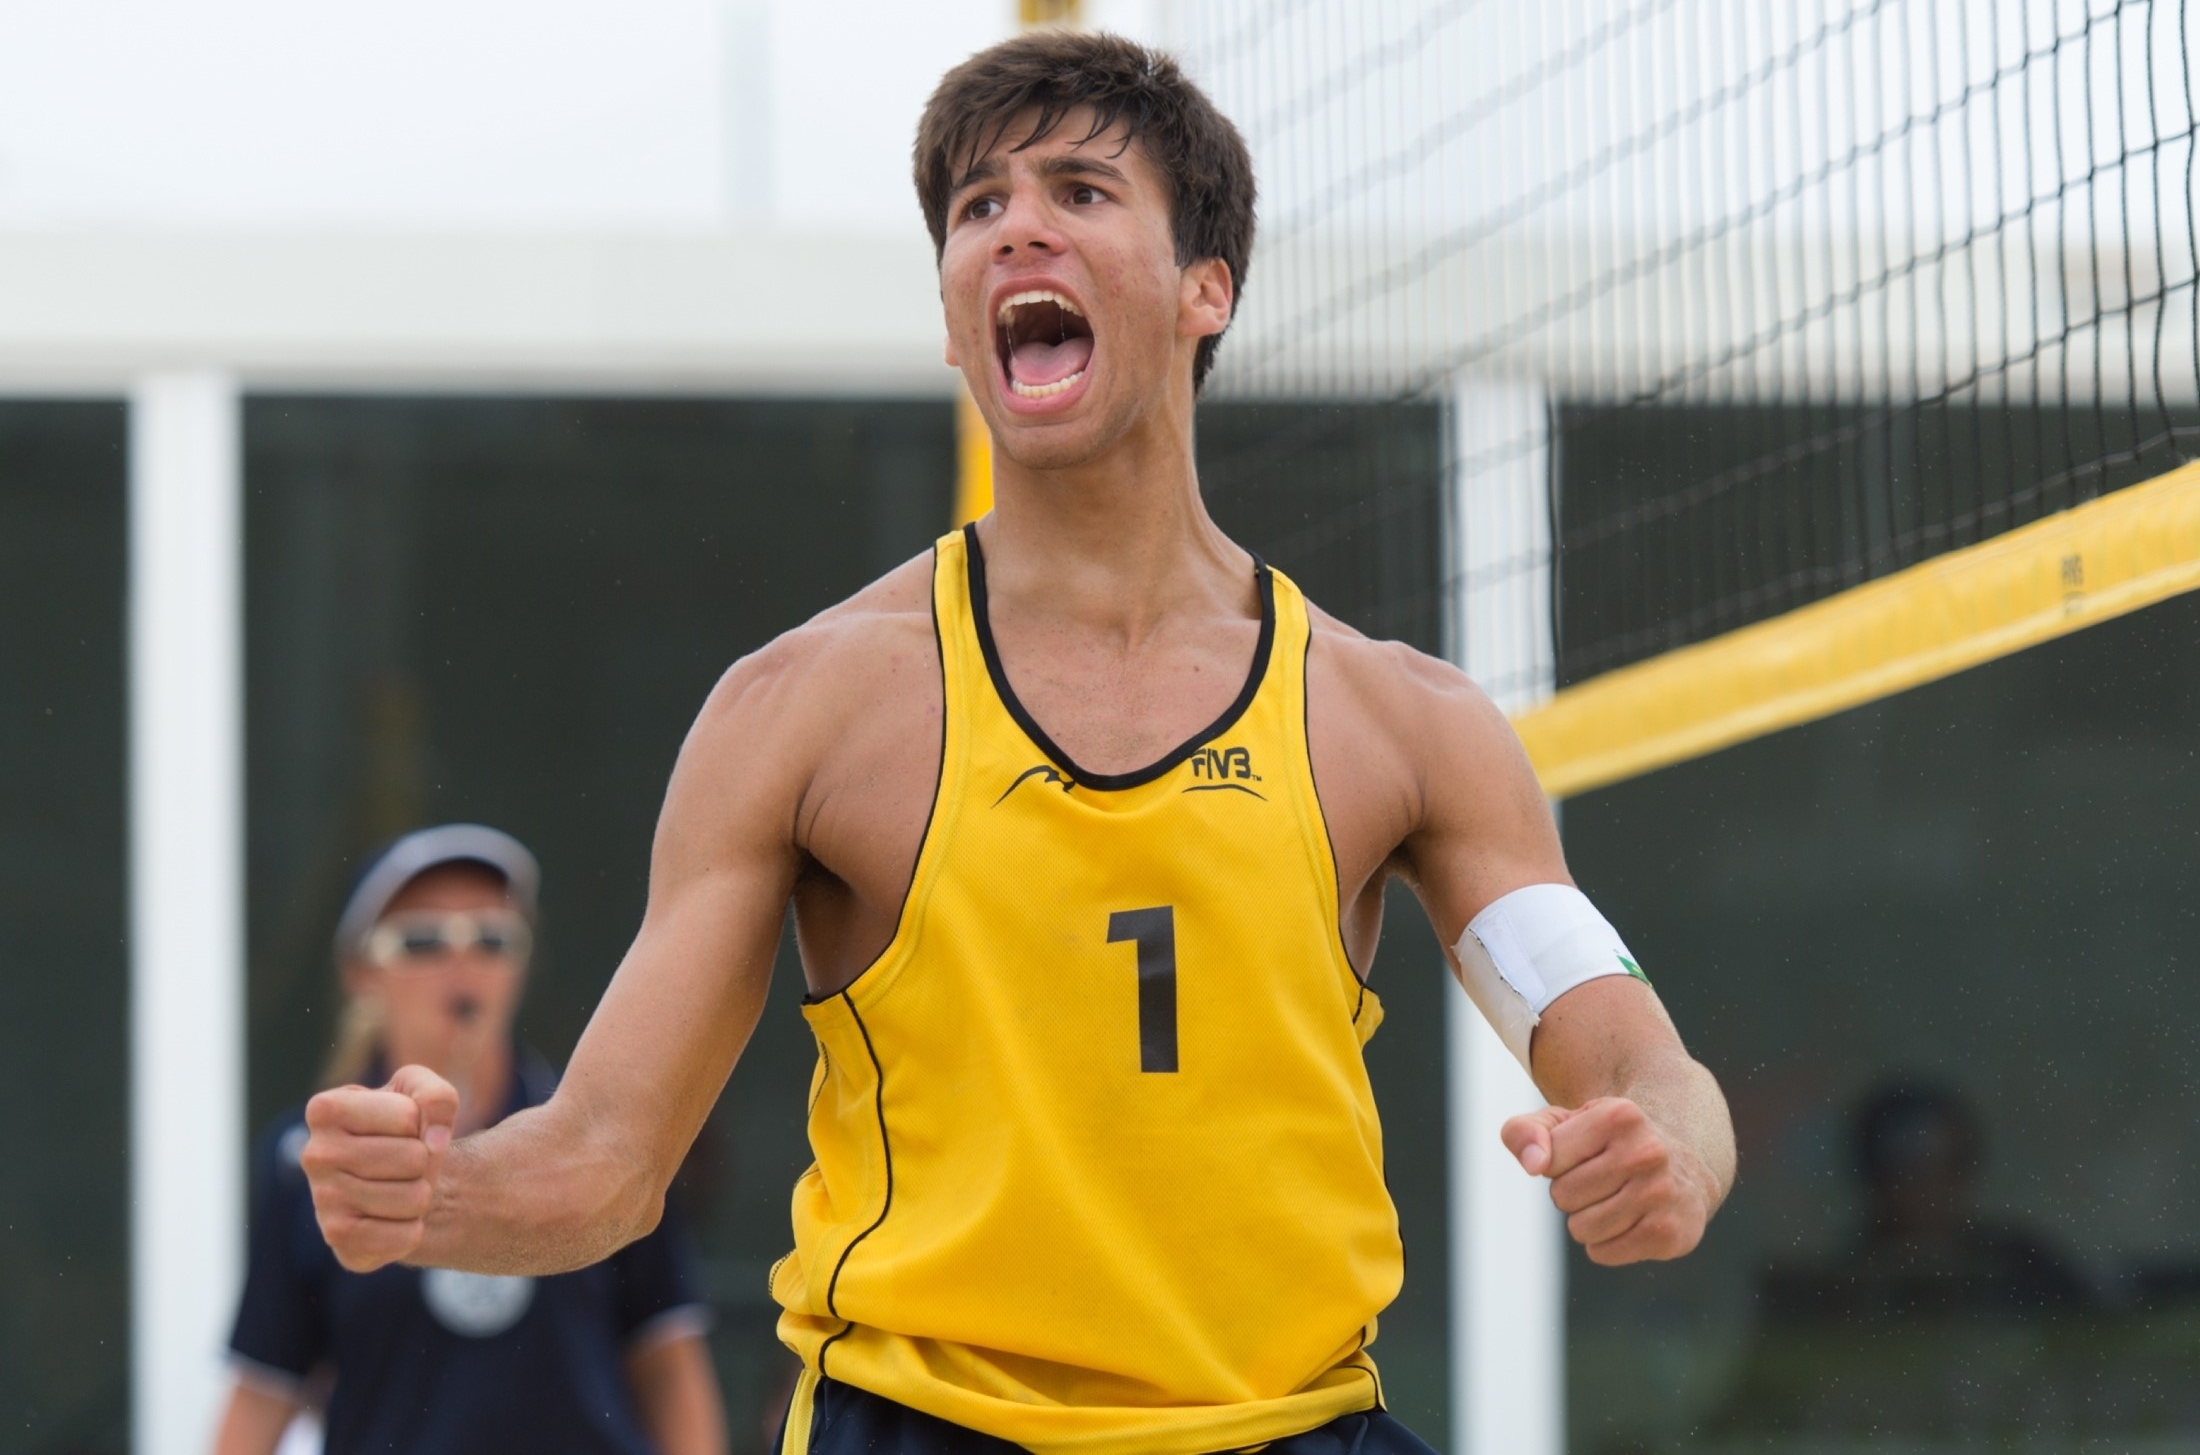 Pedro pictured at the Under-19 World Championships 2013 in Porto. Photocredit: FIVB